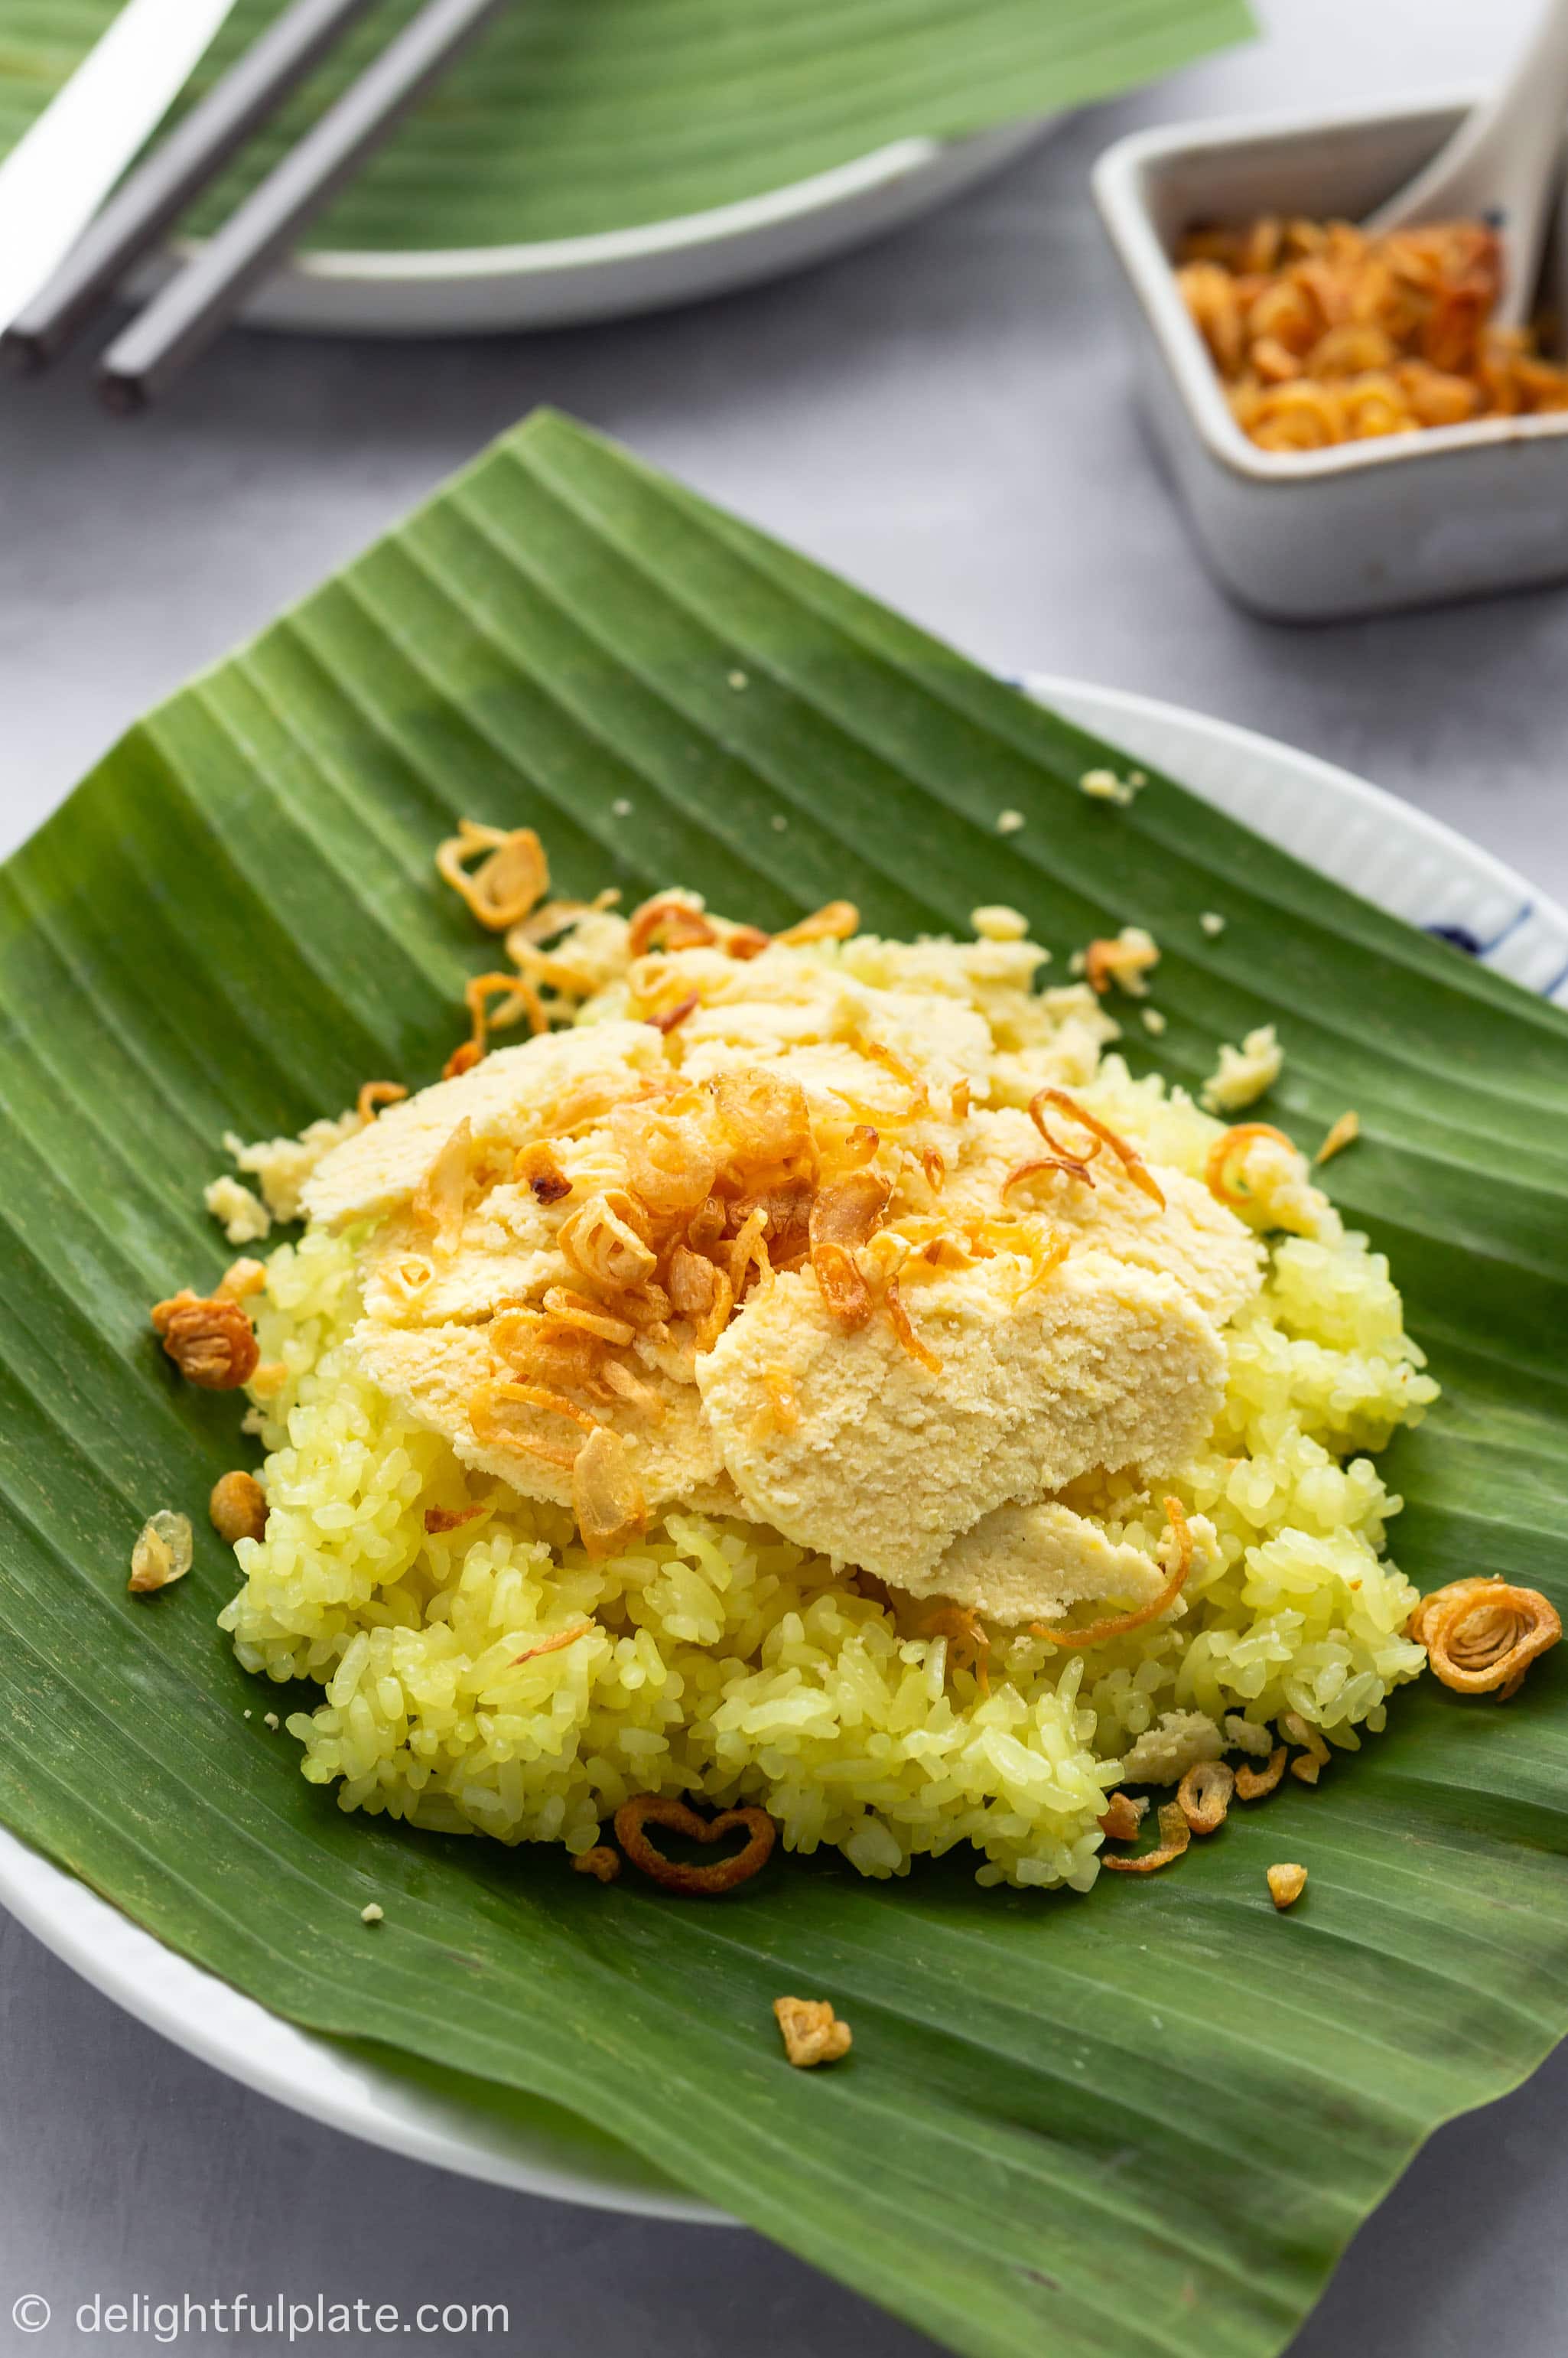 A plate of Vietnamese sticky rice with slices of mung bean and fried shallots. This is Xoi Xeo, a popular dish in Hanoi.